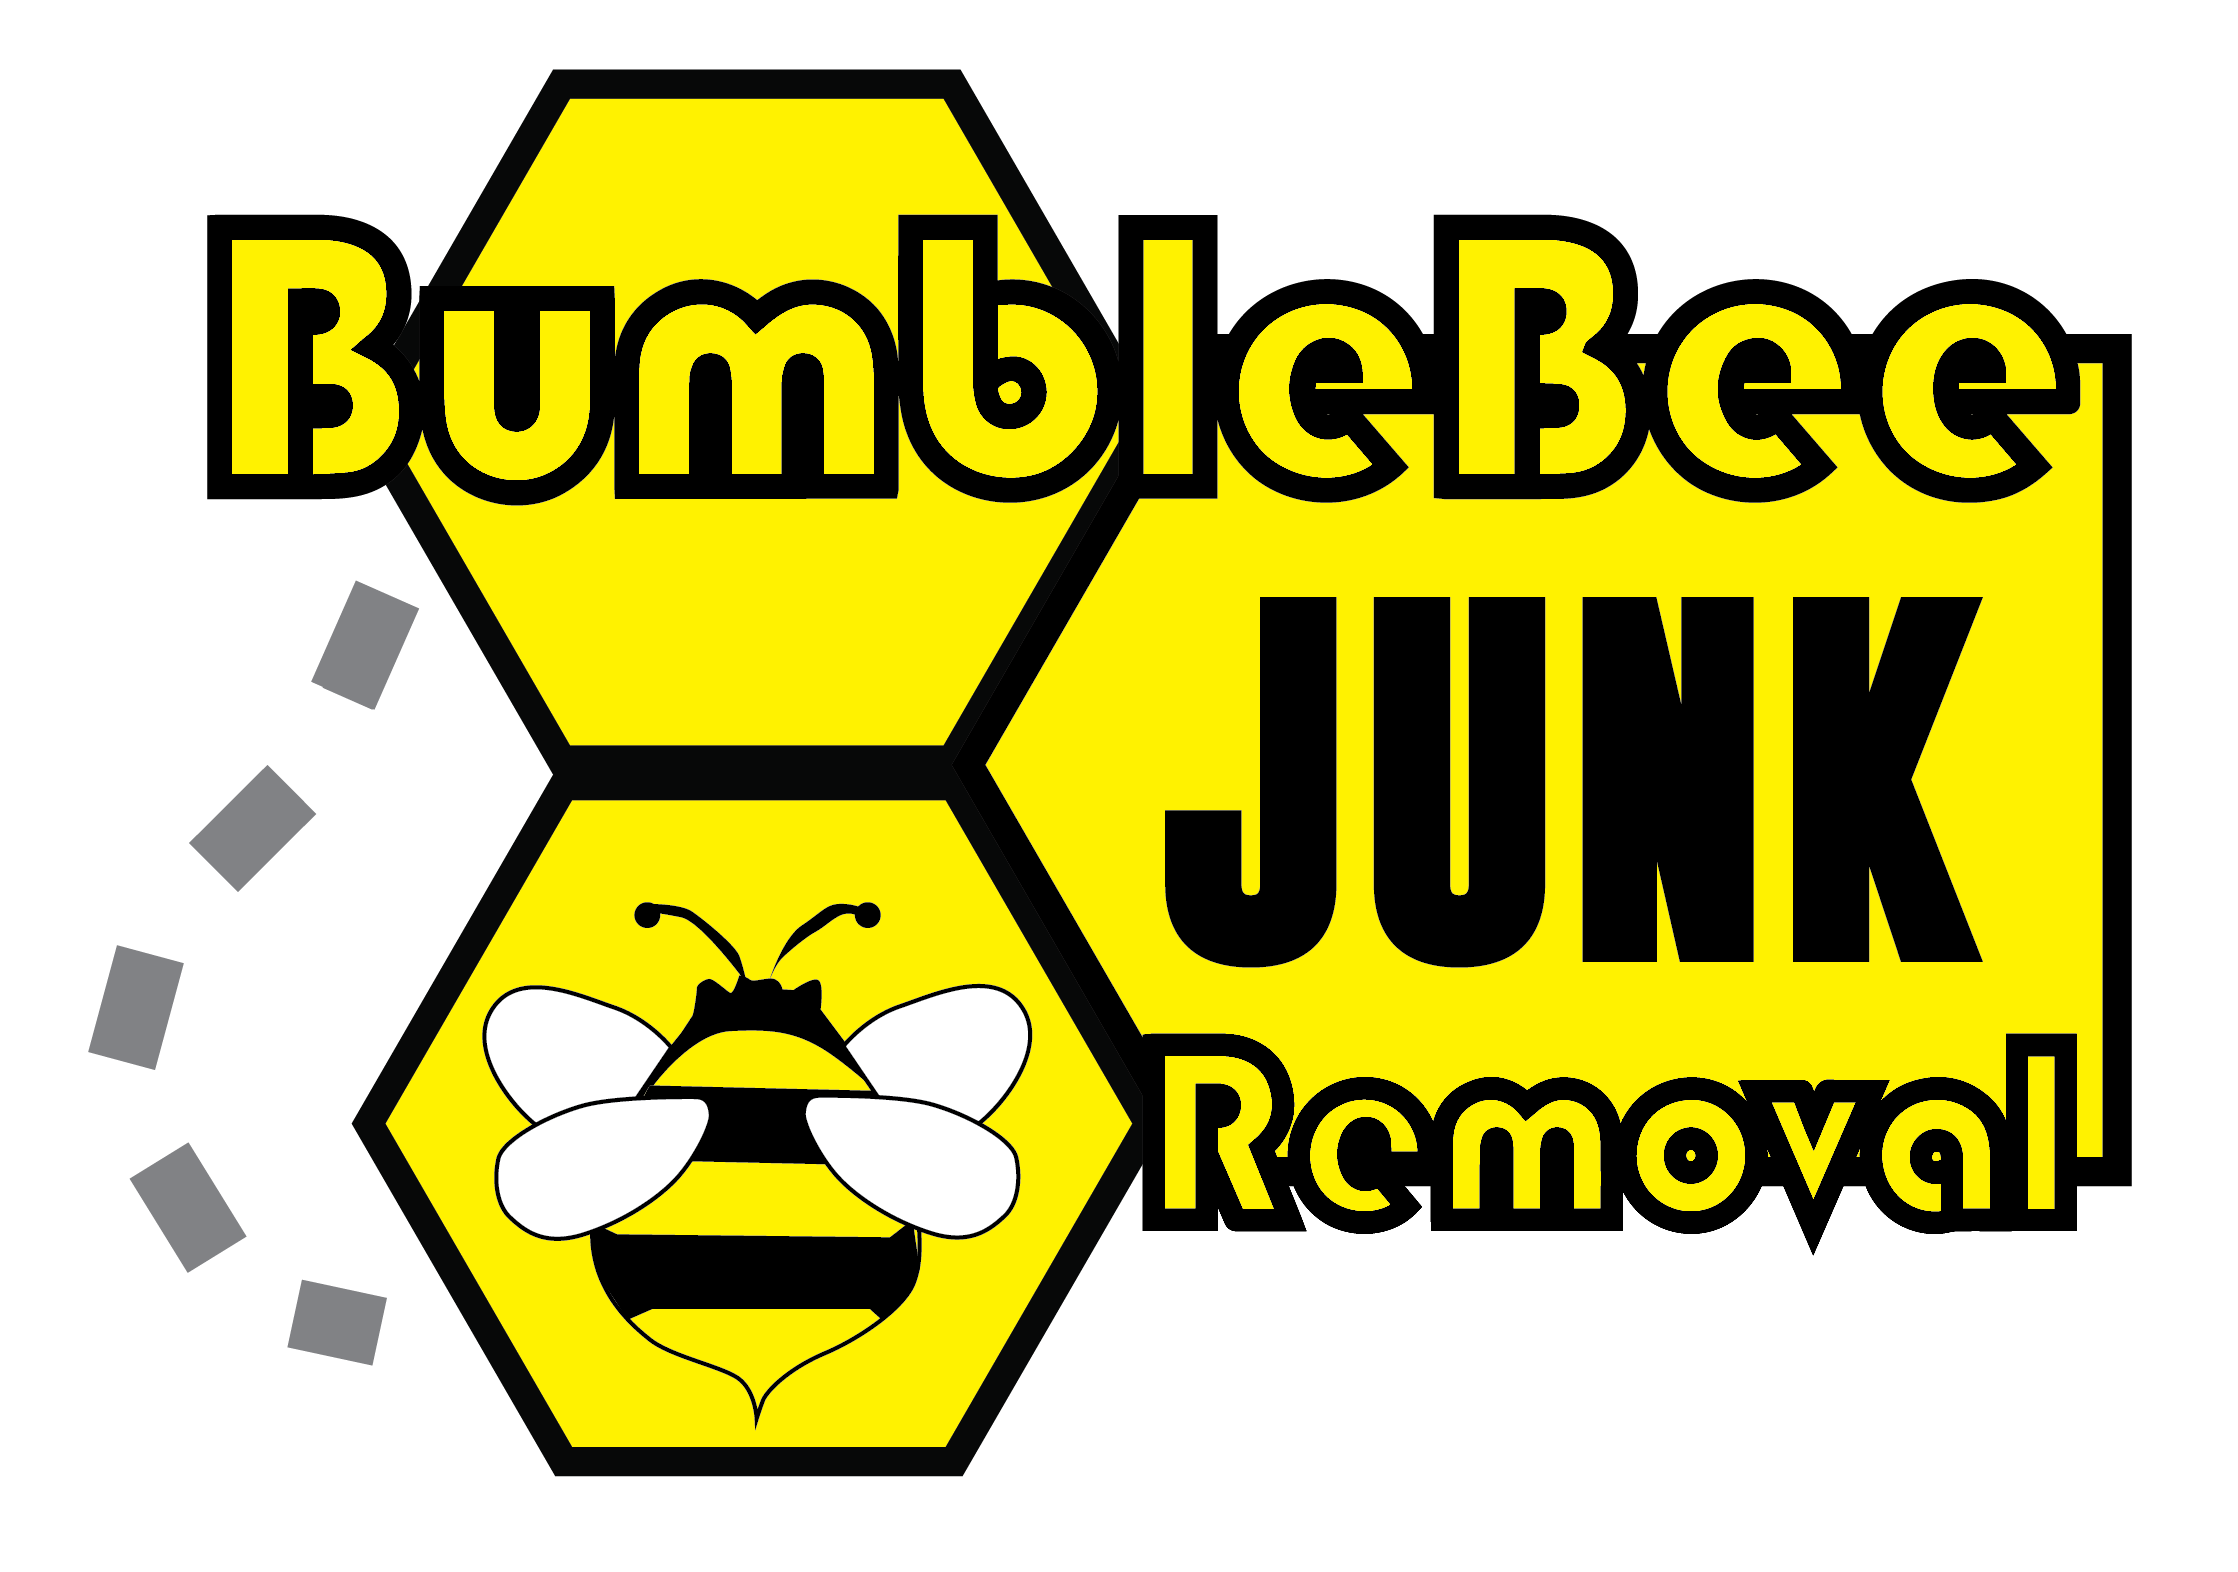 BumbleBee Junk, Monday, March 22, 2021, Press release picture